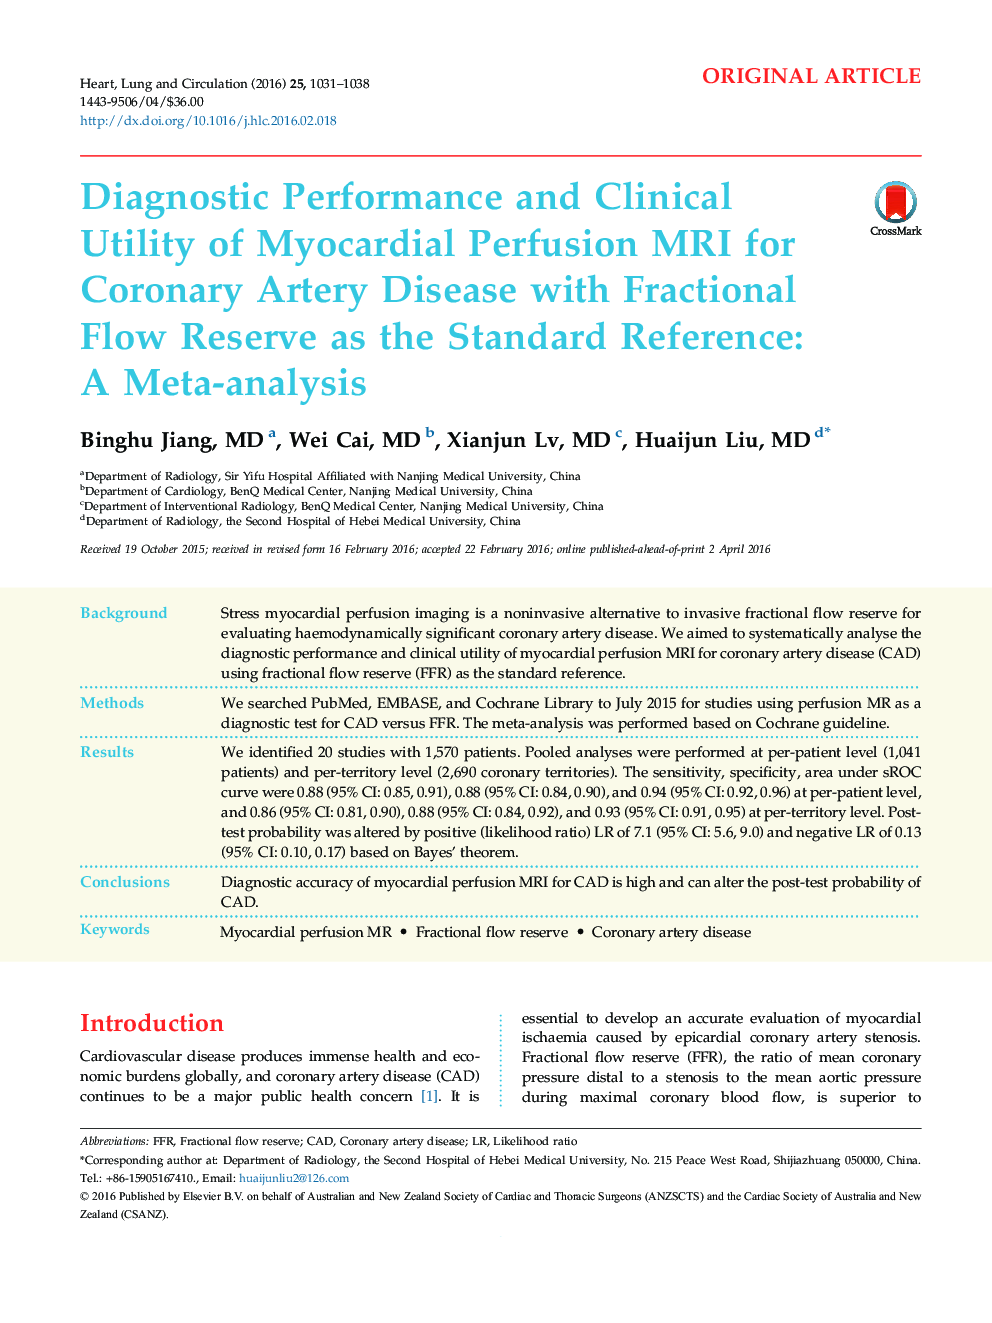 Diagnostic Performance and Clinical Utility of Myocardial Perfusion MRI for Coronary Artery Disease with Fractional Flow Reserve as the Standard Reference: A Meta-analysis